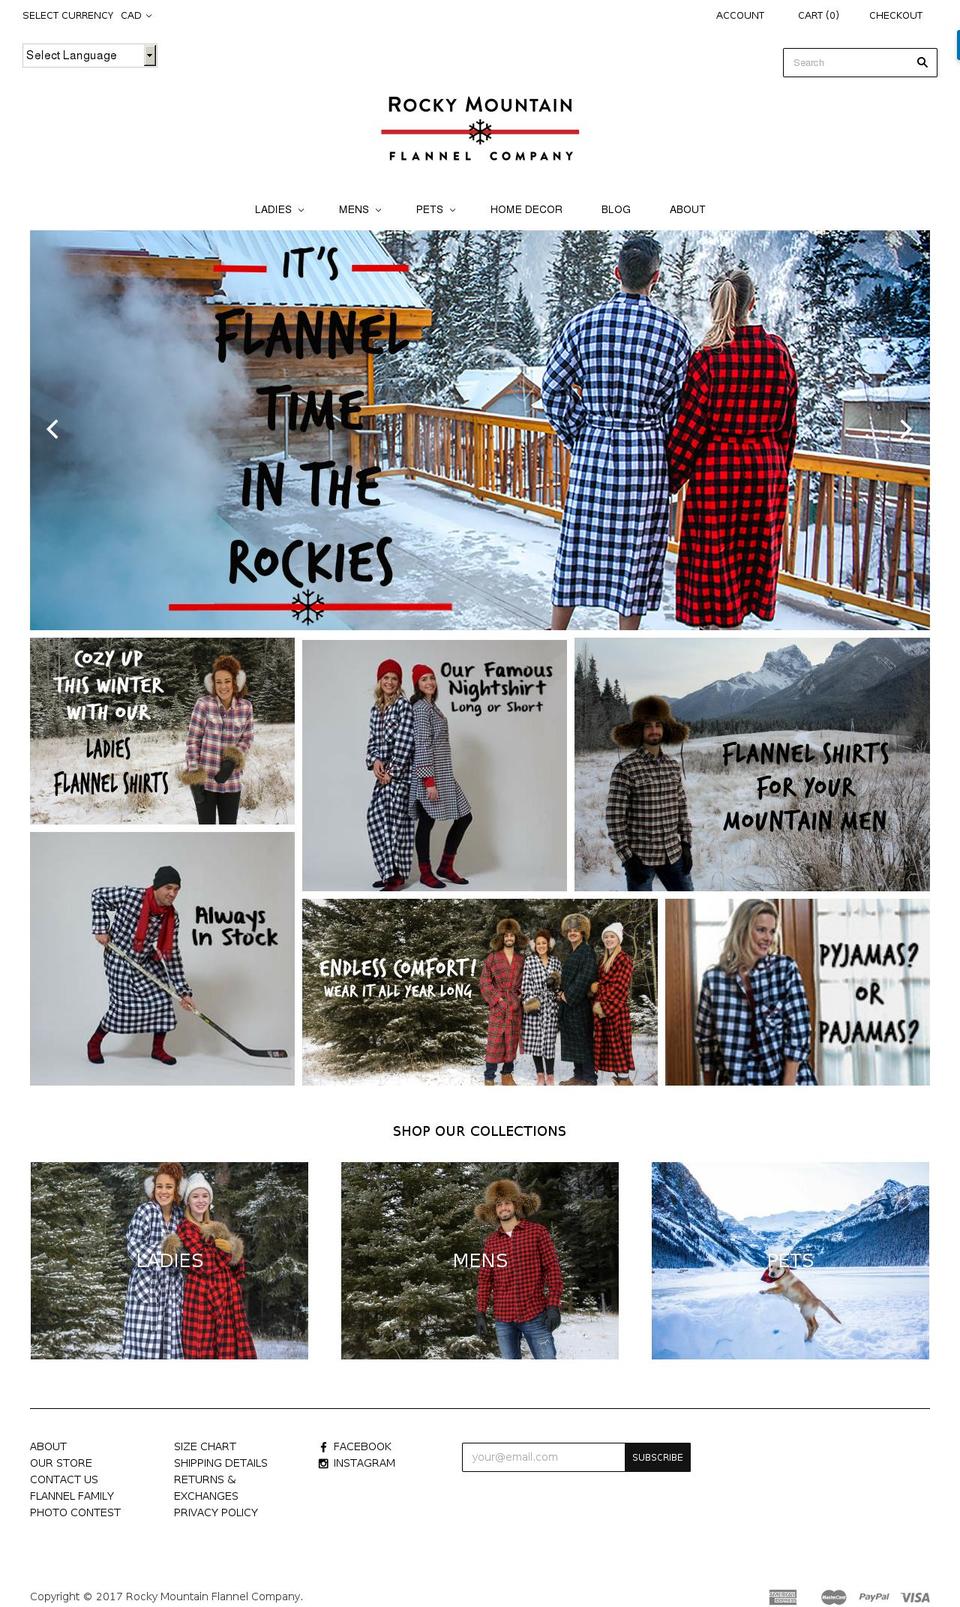 Grid Shopify theme site example rockymountainflannel.com